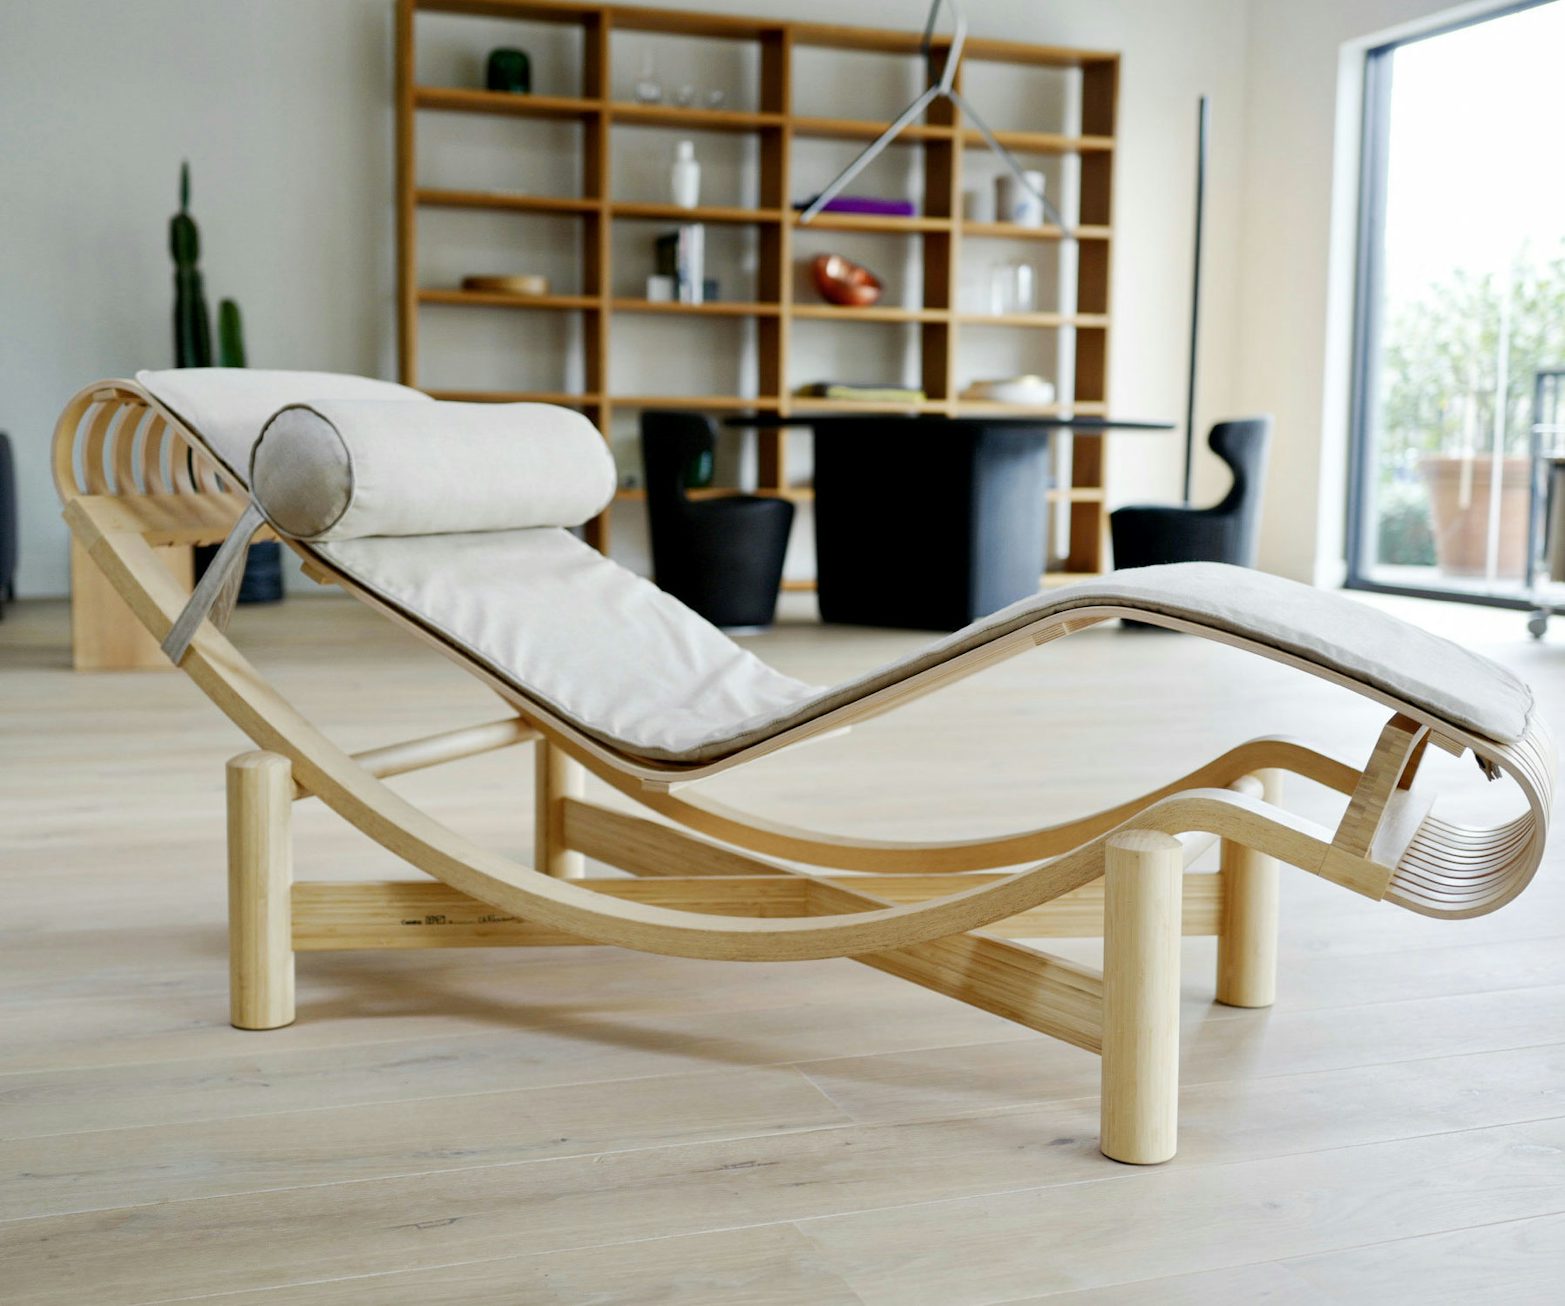 Tokyo chaise charlotte perriand